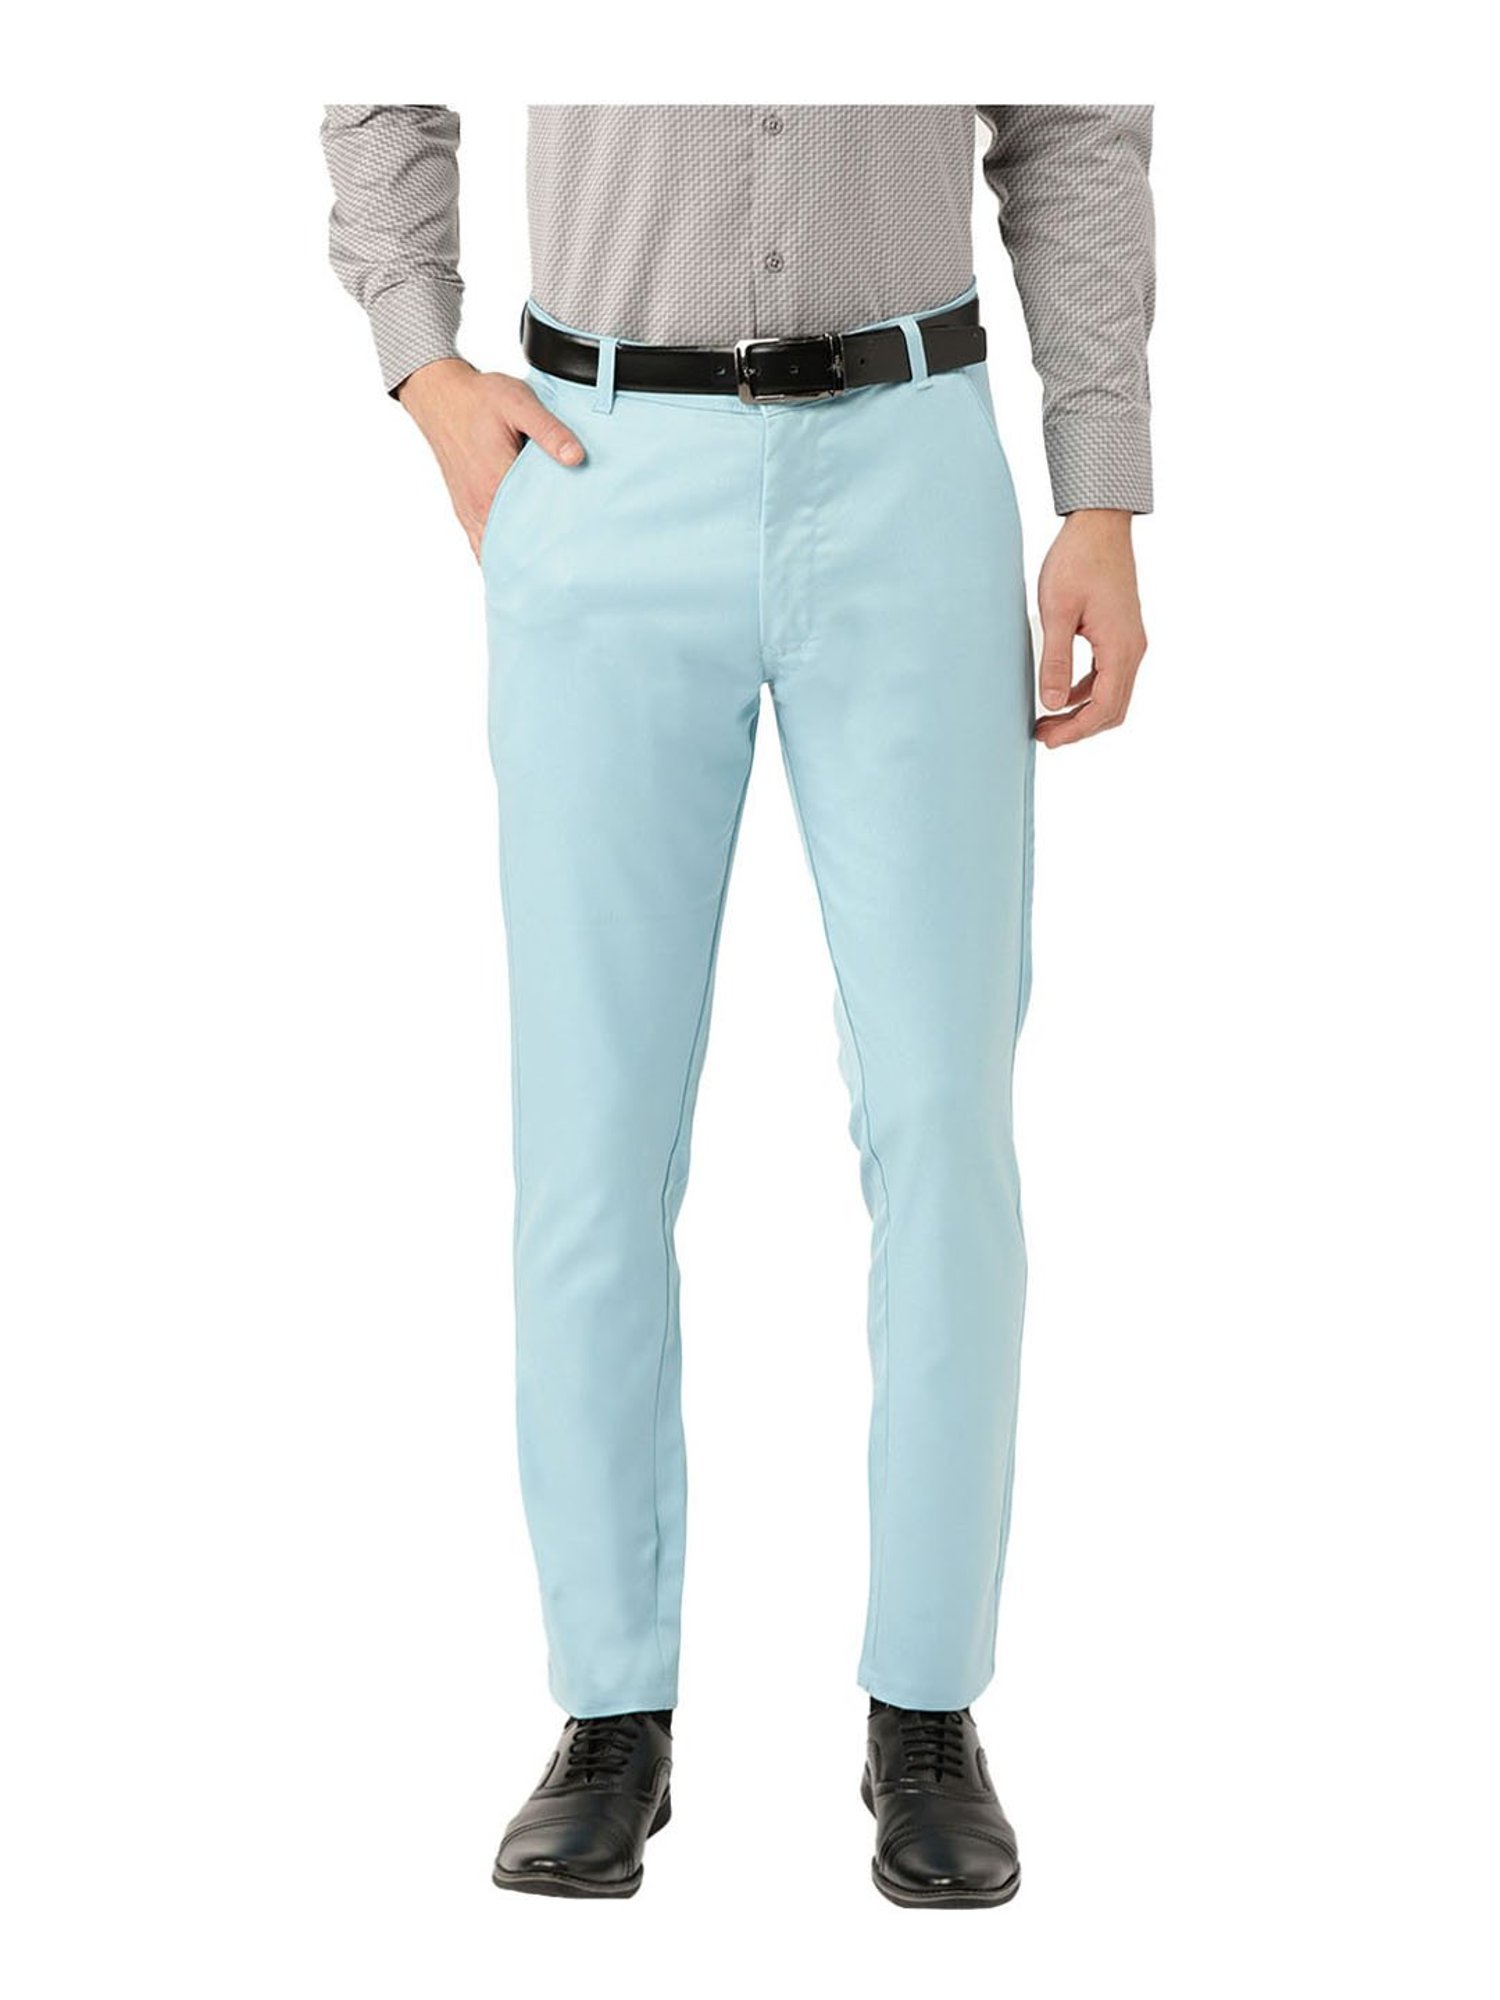 BOSS - Micro-pattern formal trousers in a cotton blend